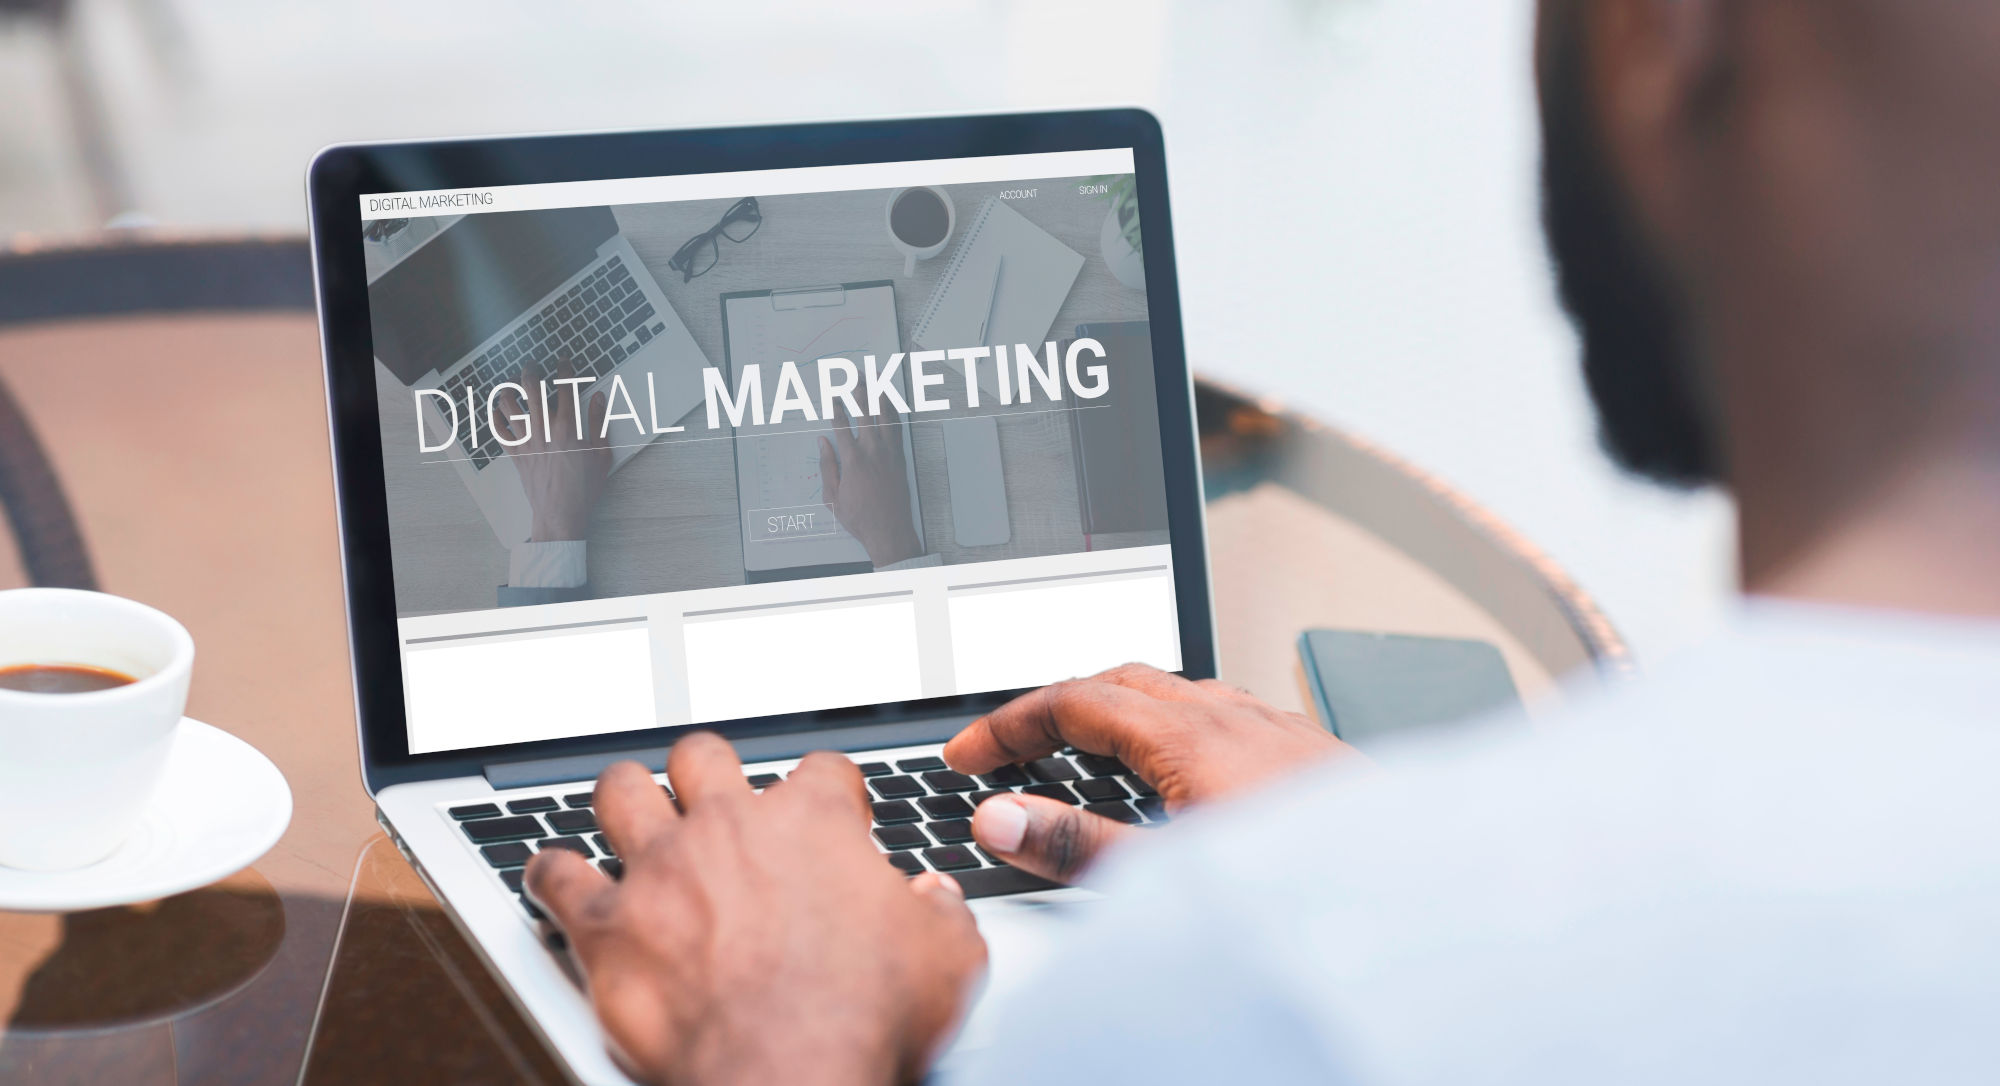 Digital marketing for the holidays: It’s not too late to get your business up to speed